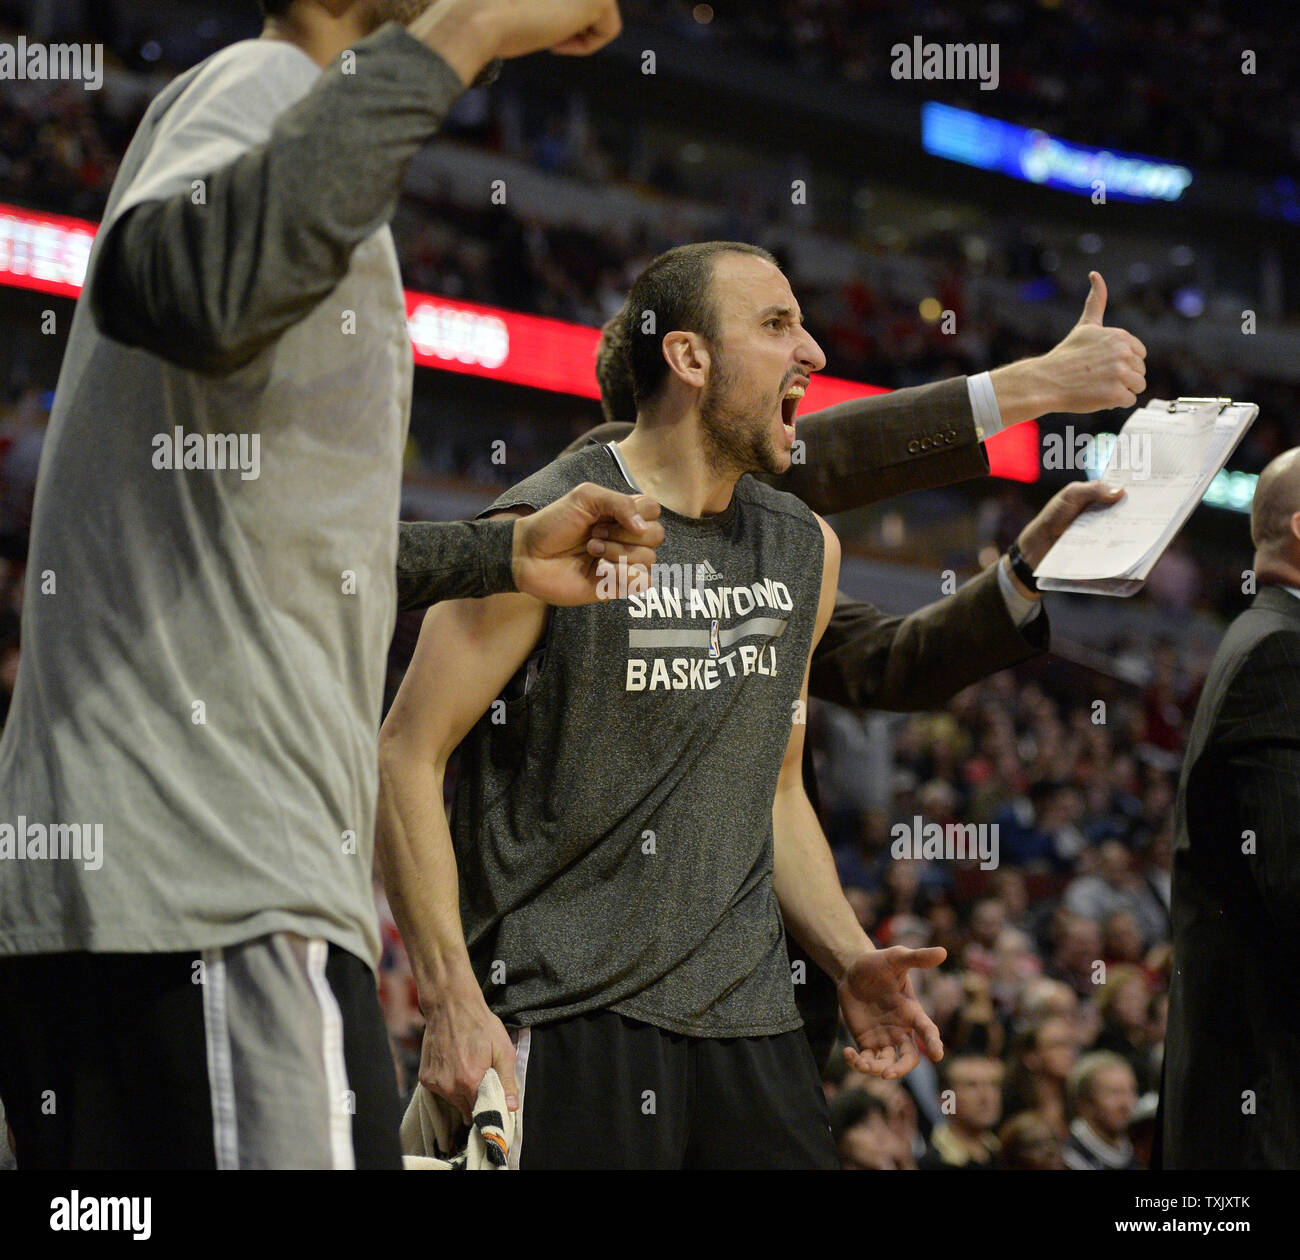 San Antonio Spurs guard Manu Ginobili cheers from the bench during the fourth quarter against the Chicago Bulls at the United Center in Chicago on March 11, 2014. The Spurs defeated the Bulls 104-96.     UPI/Brian Kersey Stock Photo